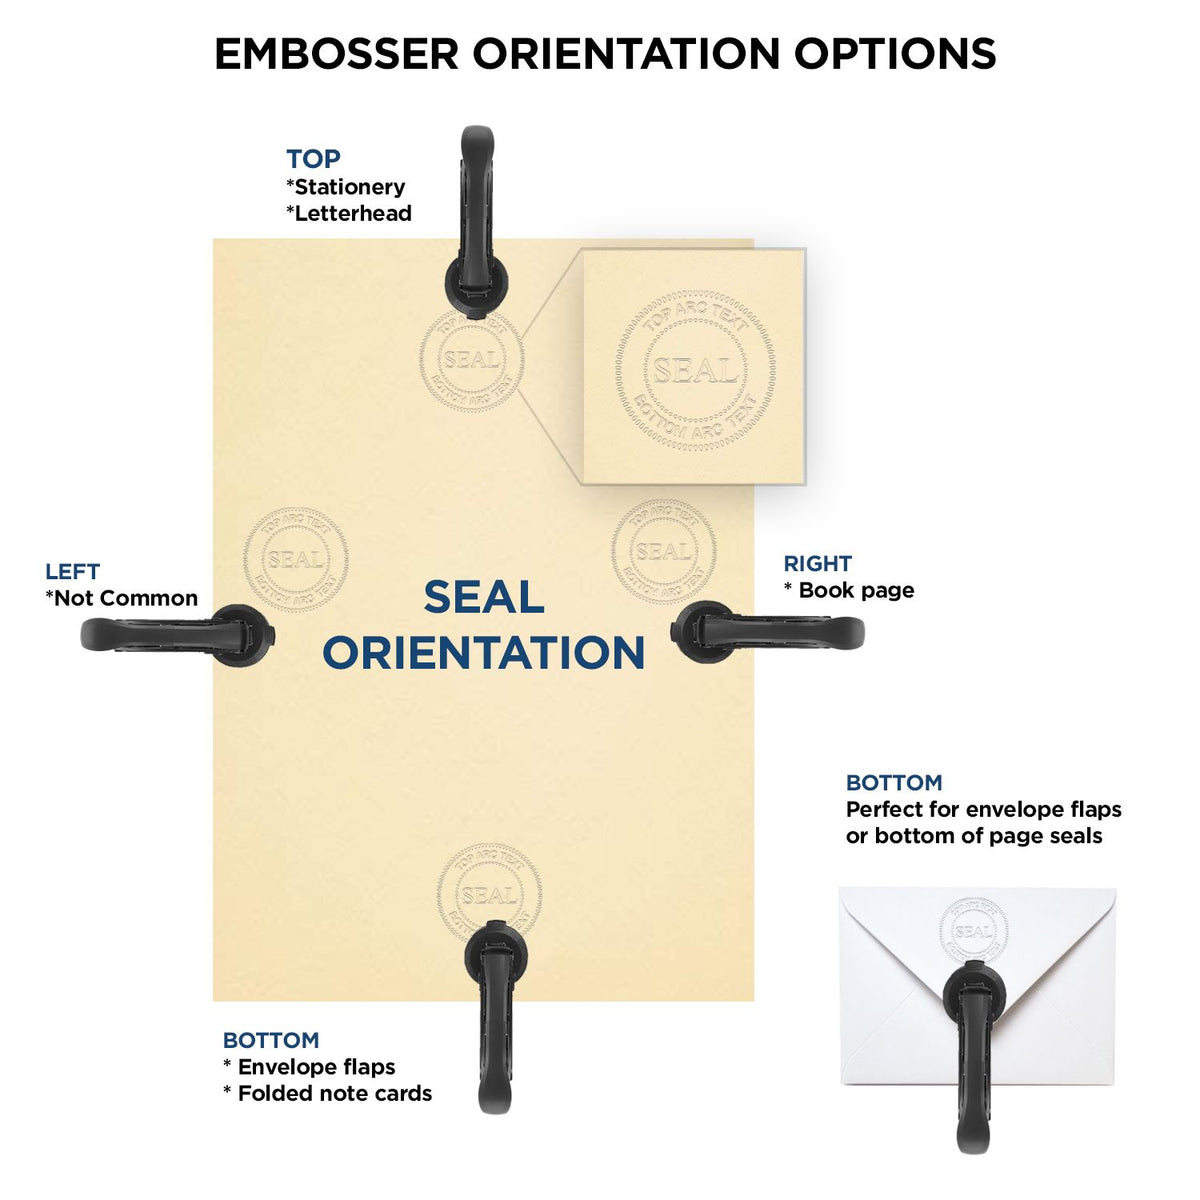 An infographic for the Handheld Maine Architect Seal Embosser showing embosser orientation, this is showing examples of a top, bottom, right and left insert.